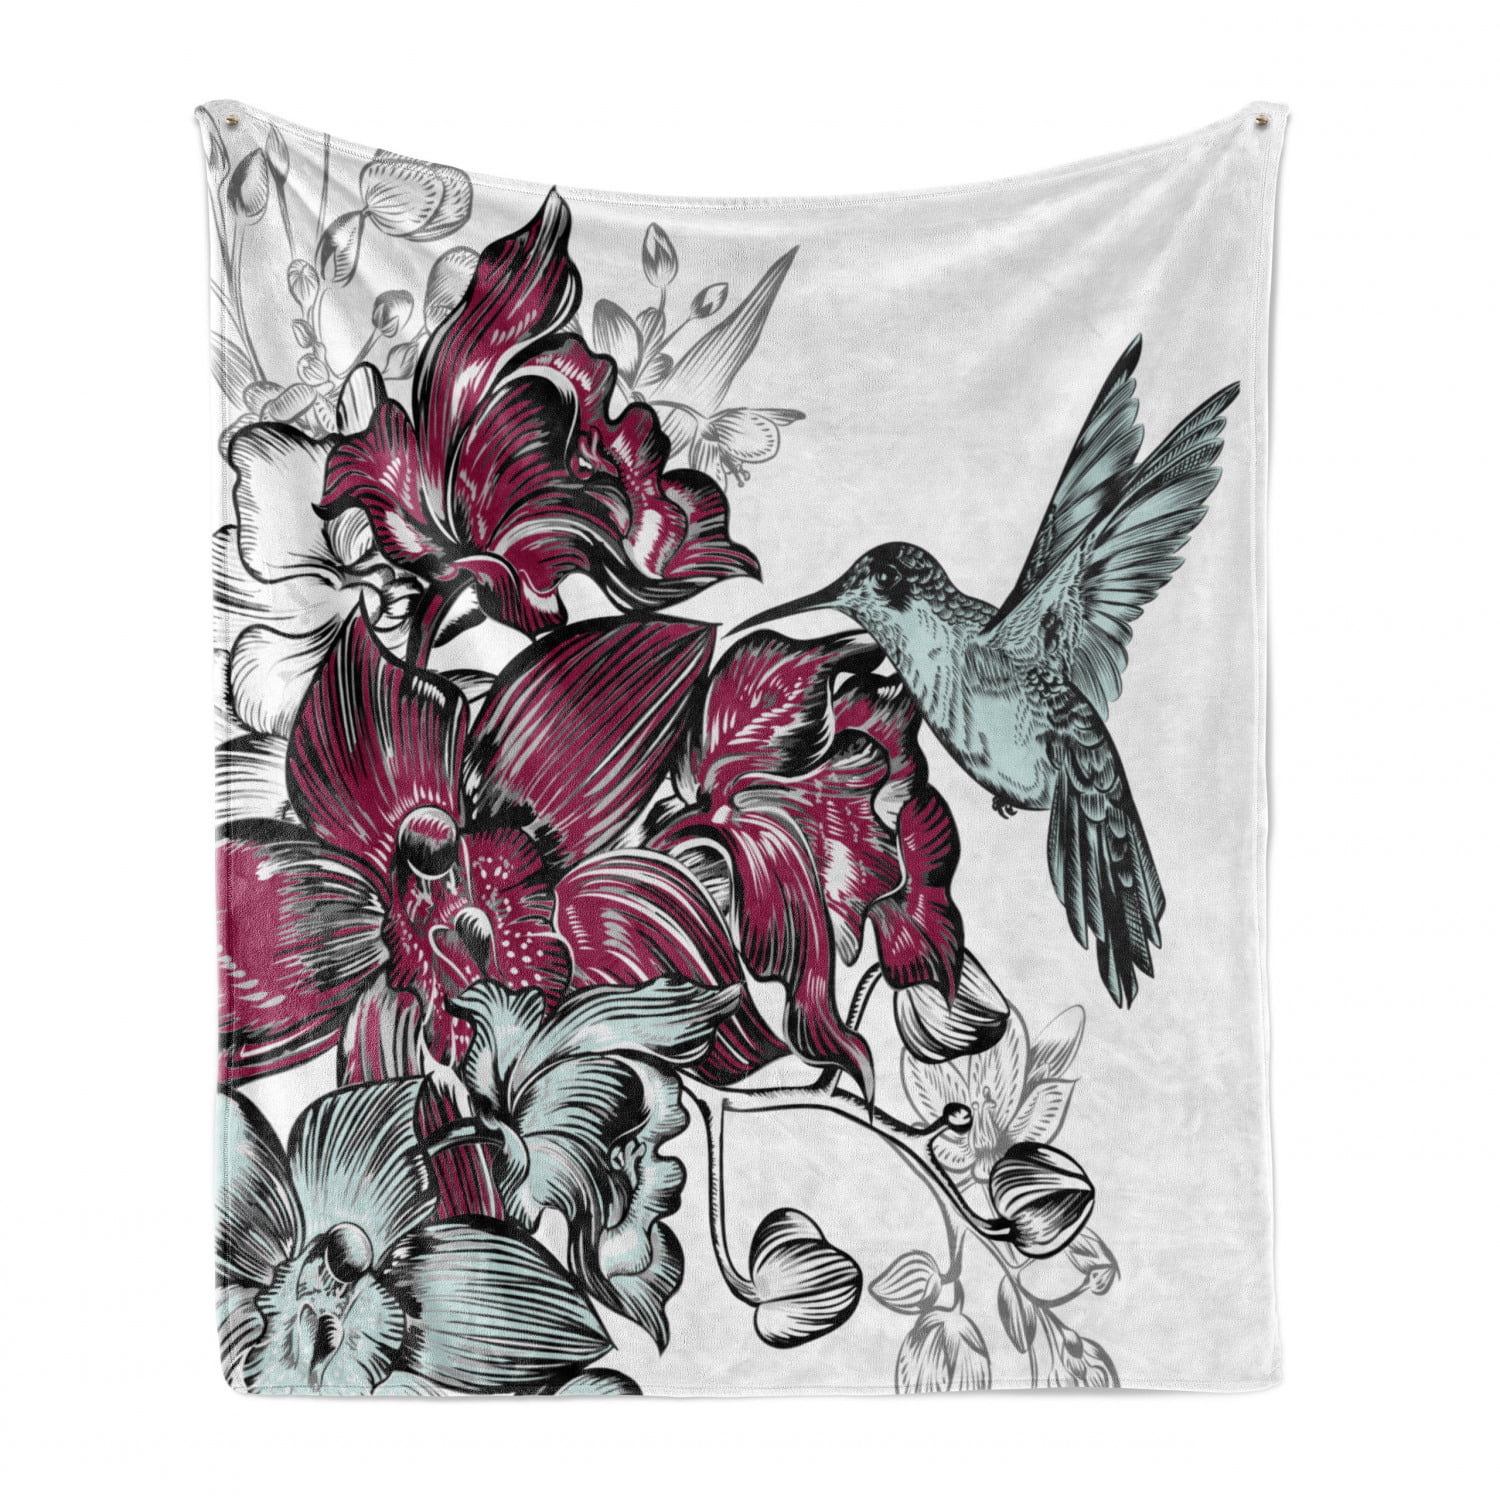 Hummingbird Orchids Blossom Motifs Winter Floral Graphic Illustration Dark Blue Grey Multicolor Ambesonne Bird Throw Blanket Flannel Fleece Accent Piece Soft Couch Cover for Adults 50 x 60